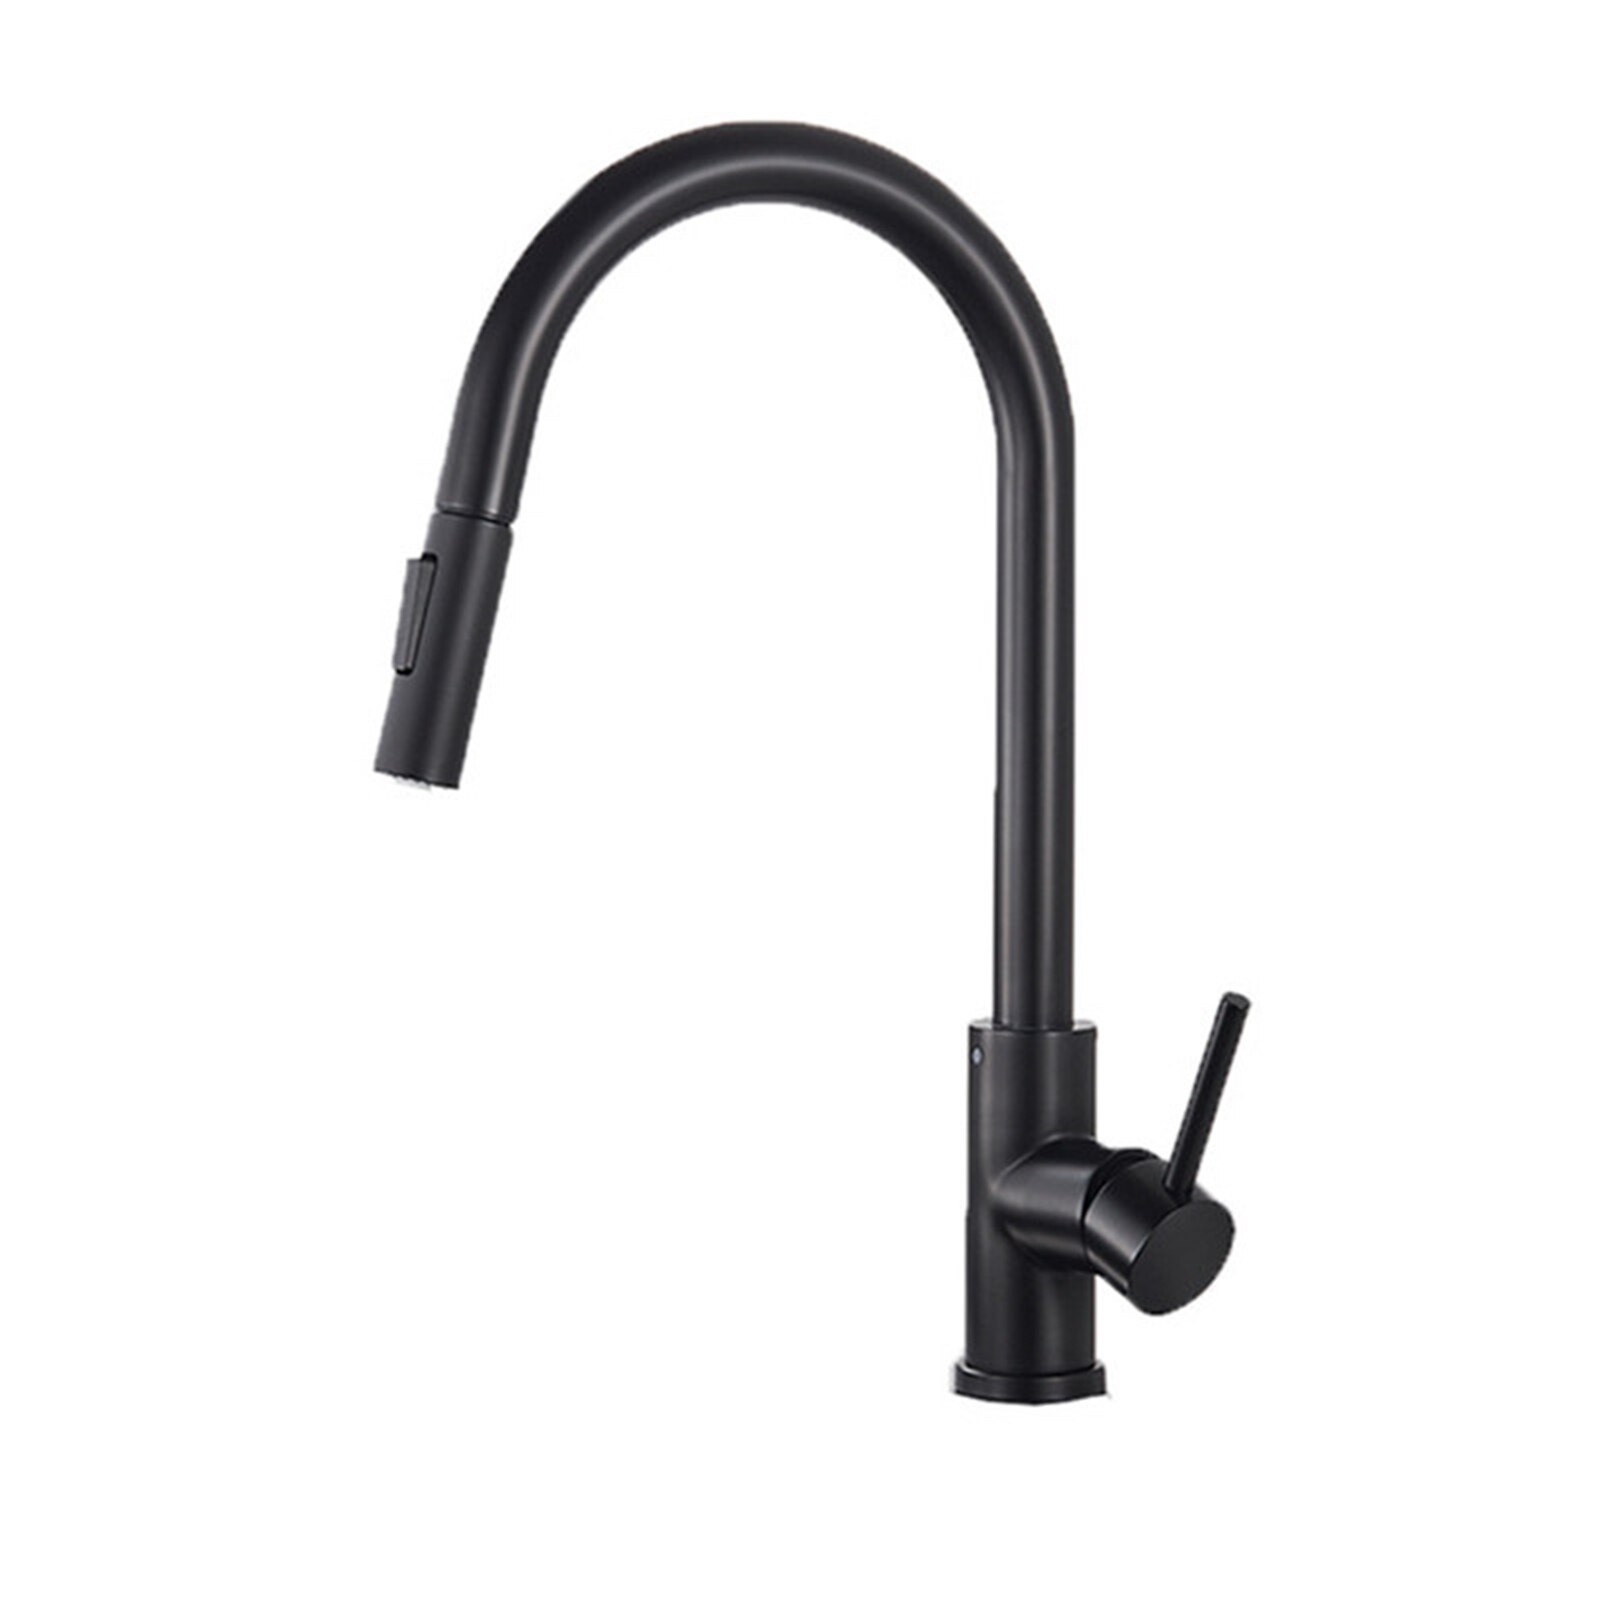 Fontana Bavaria Matte Black 360 Rotation Kitchen Sink Faucet With Pull Out Sprayer